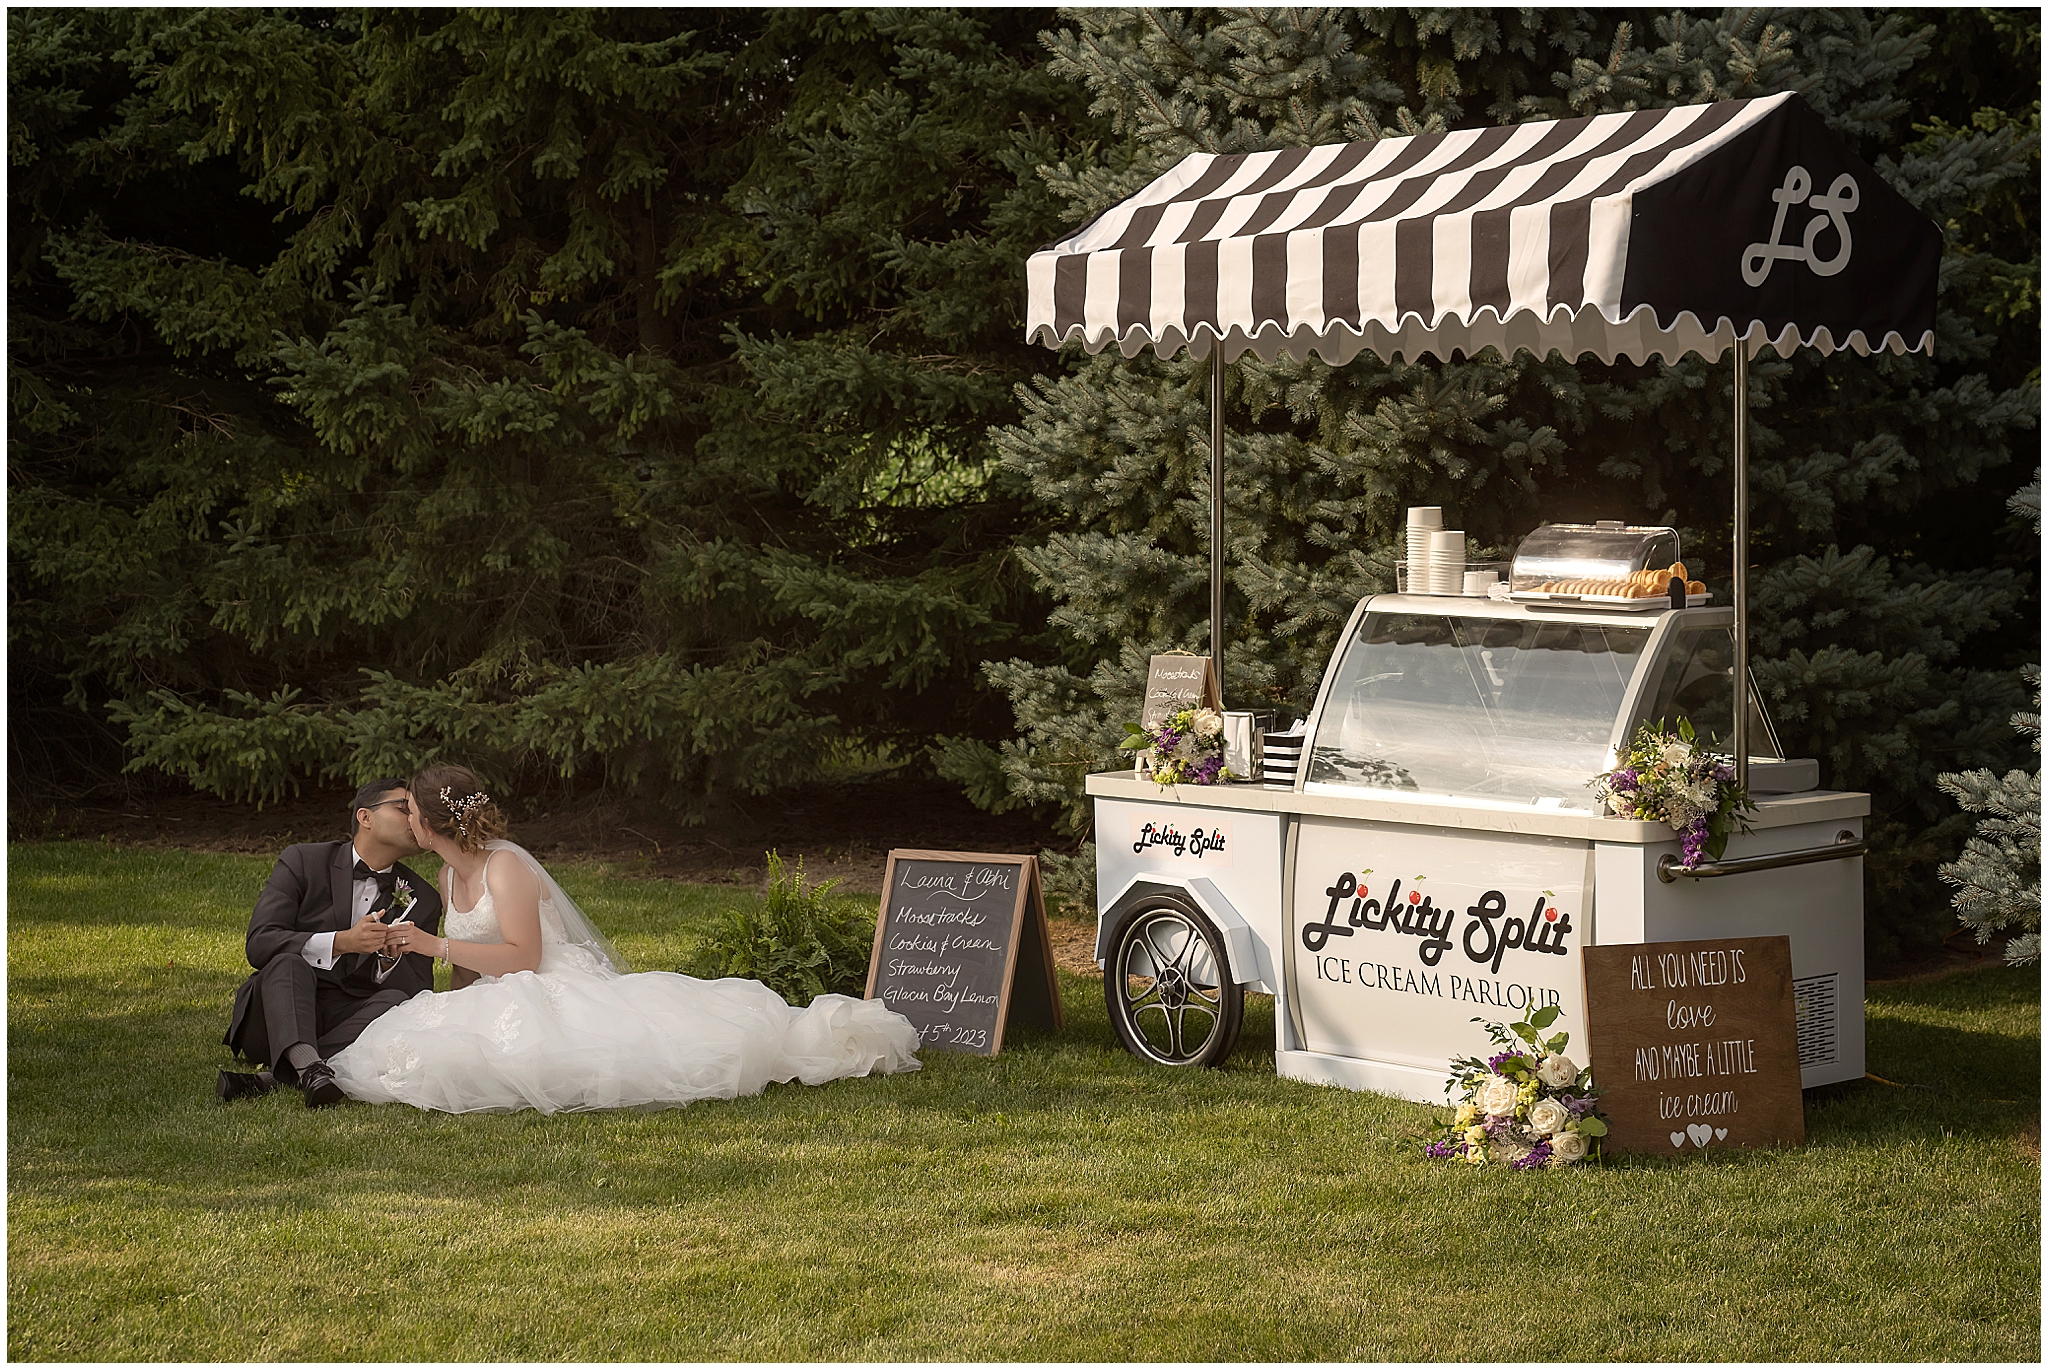 lickity split ice cream cart at wedding in Parkhill ontario